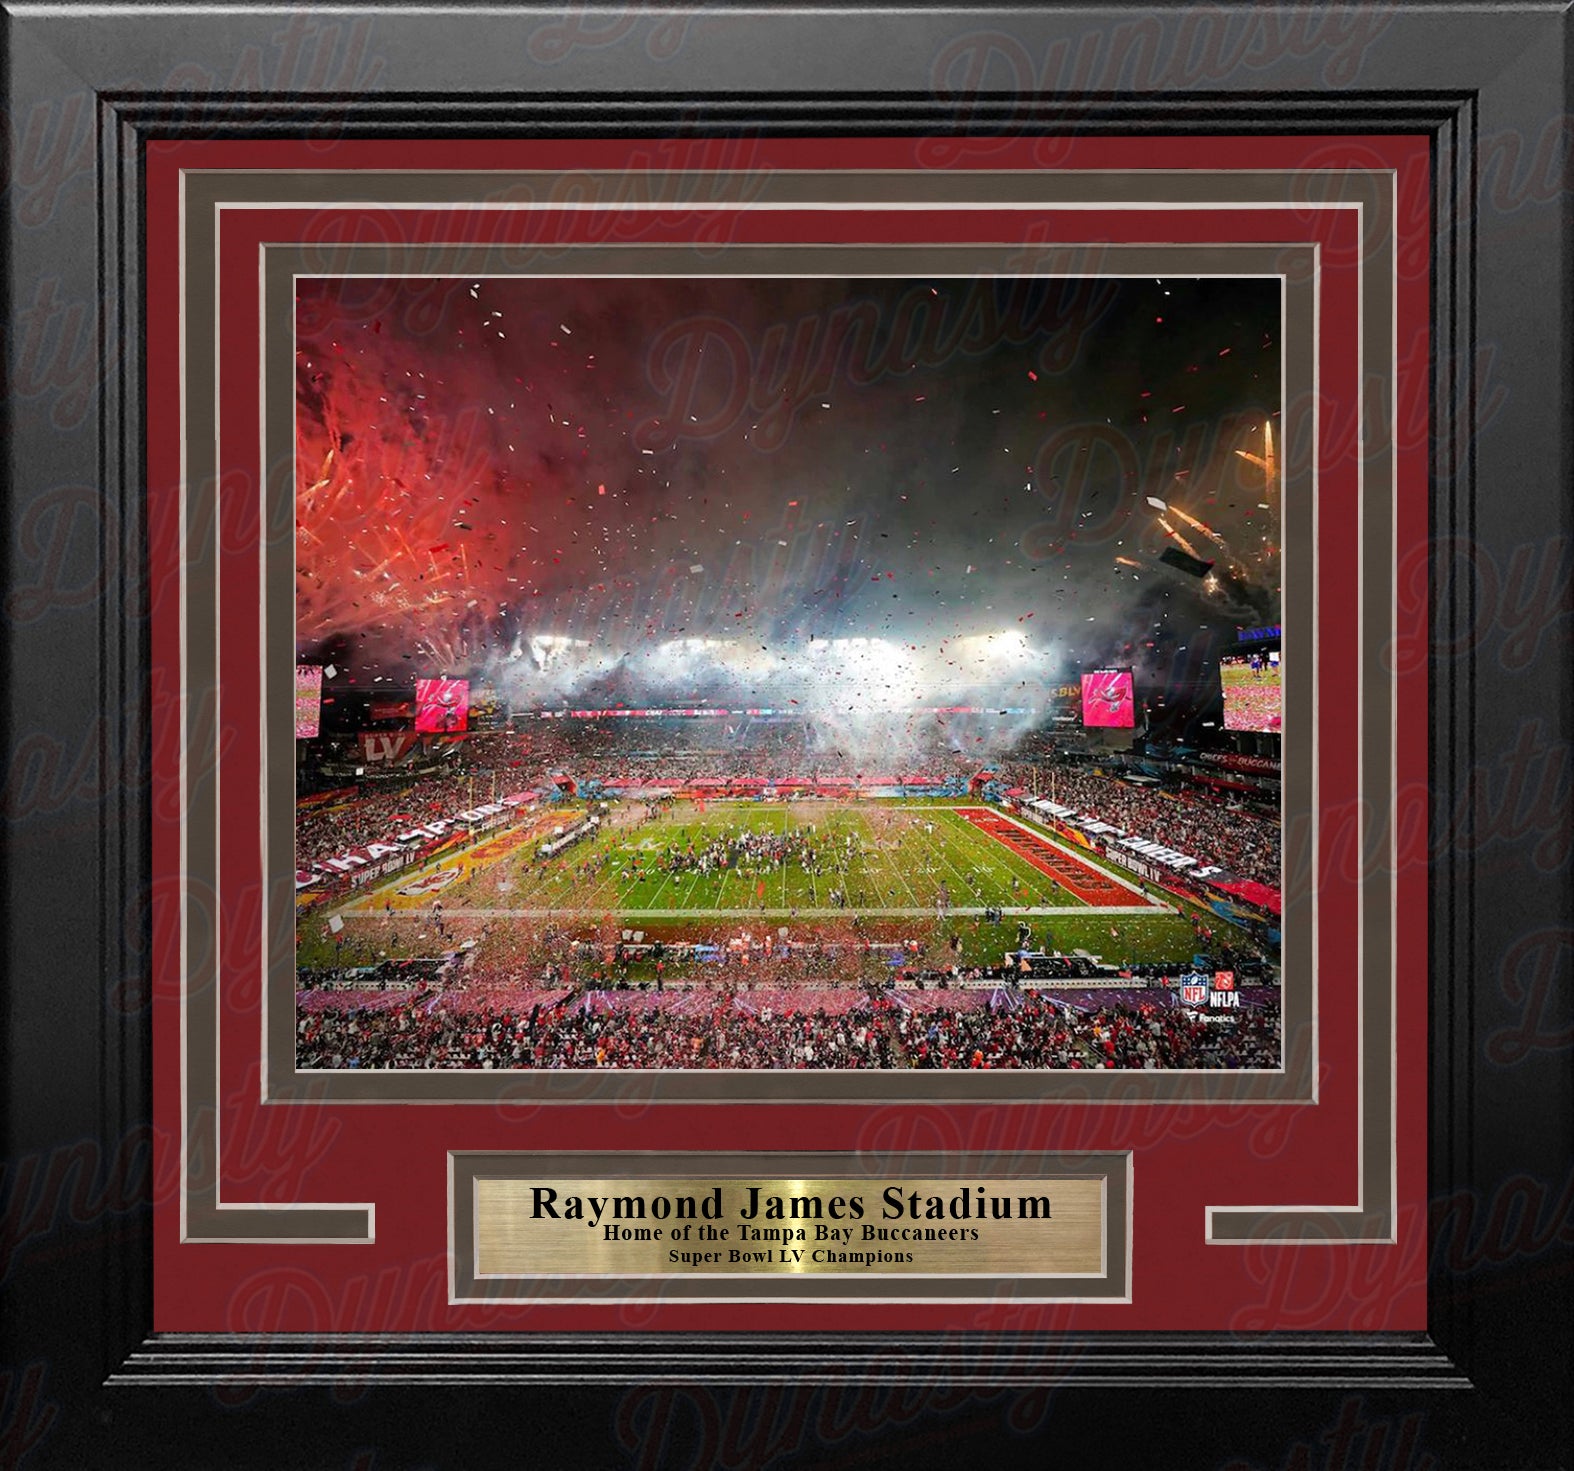 Lids Tampa Bay Buccaneers Fanatics Authentic Framed 23 x 27 Super Bowl LV  Champions Floating Ticket Collage